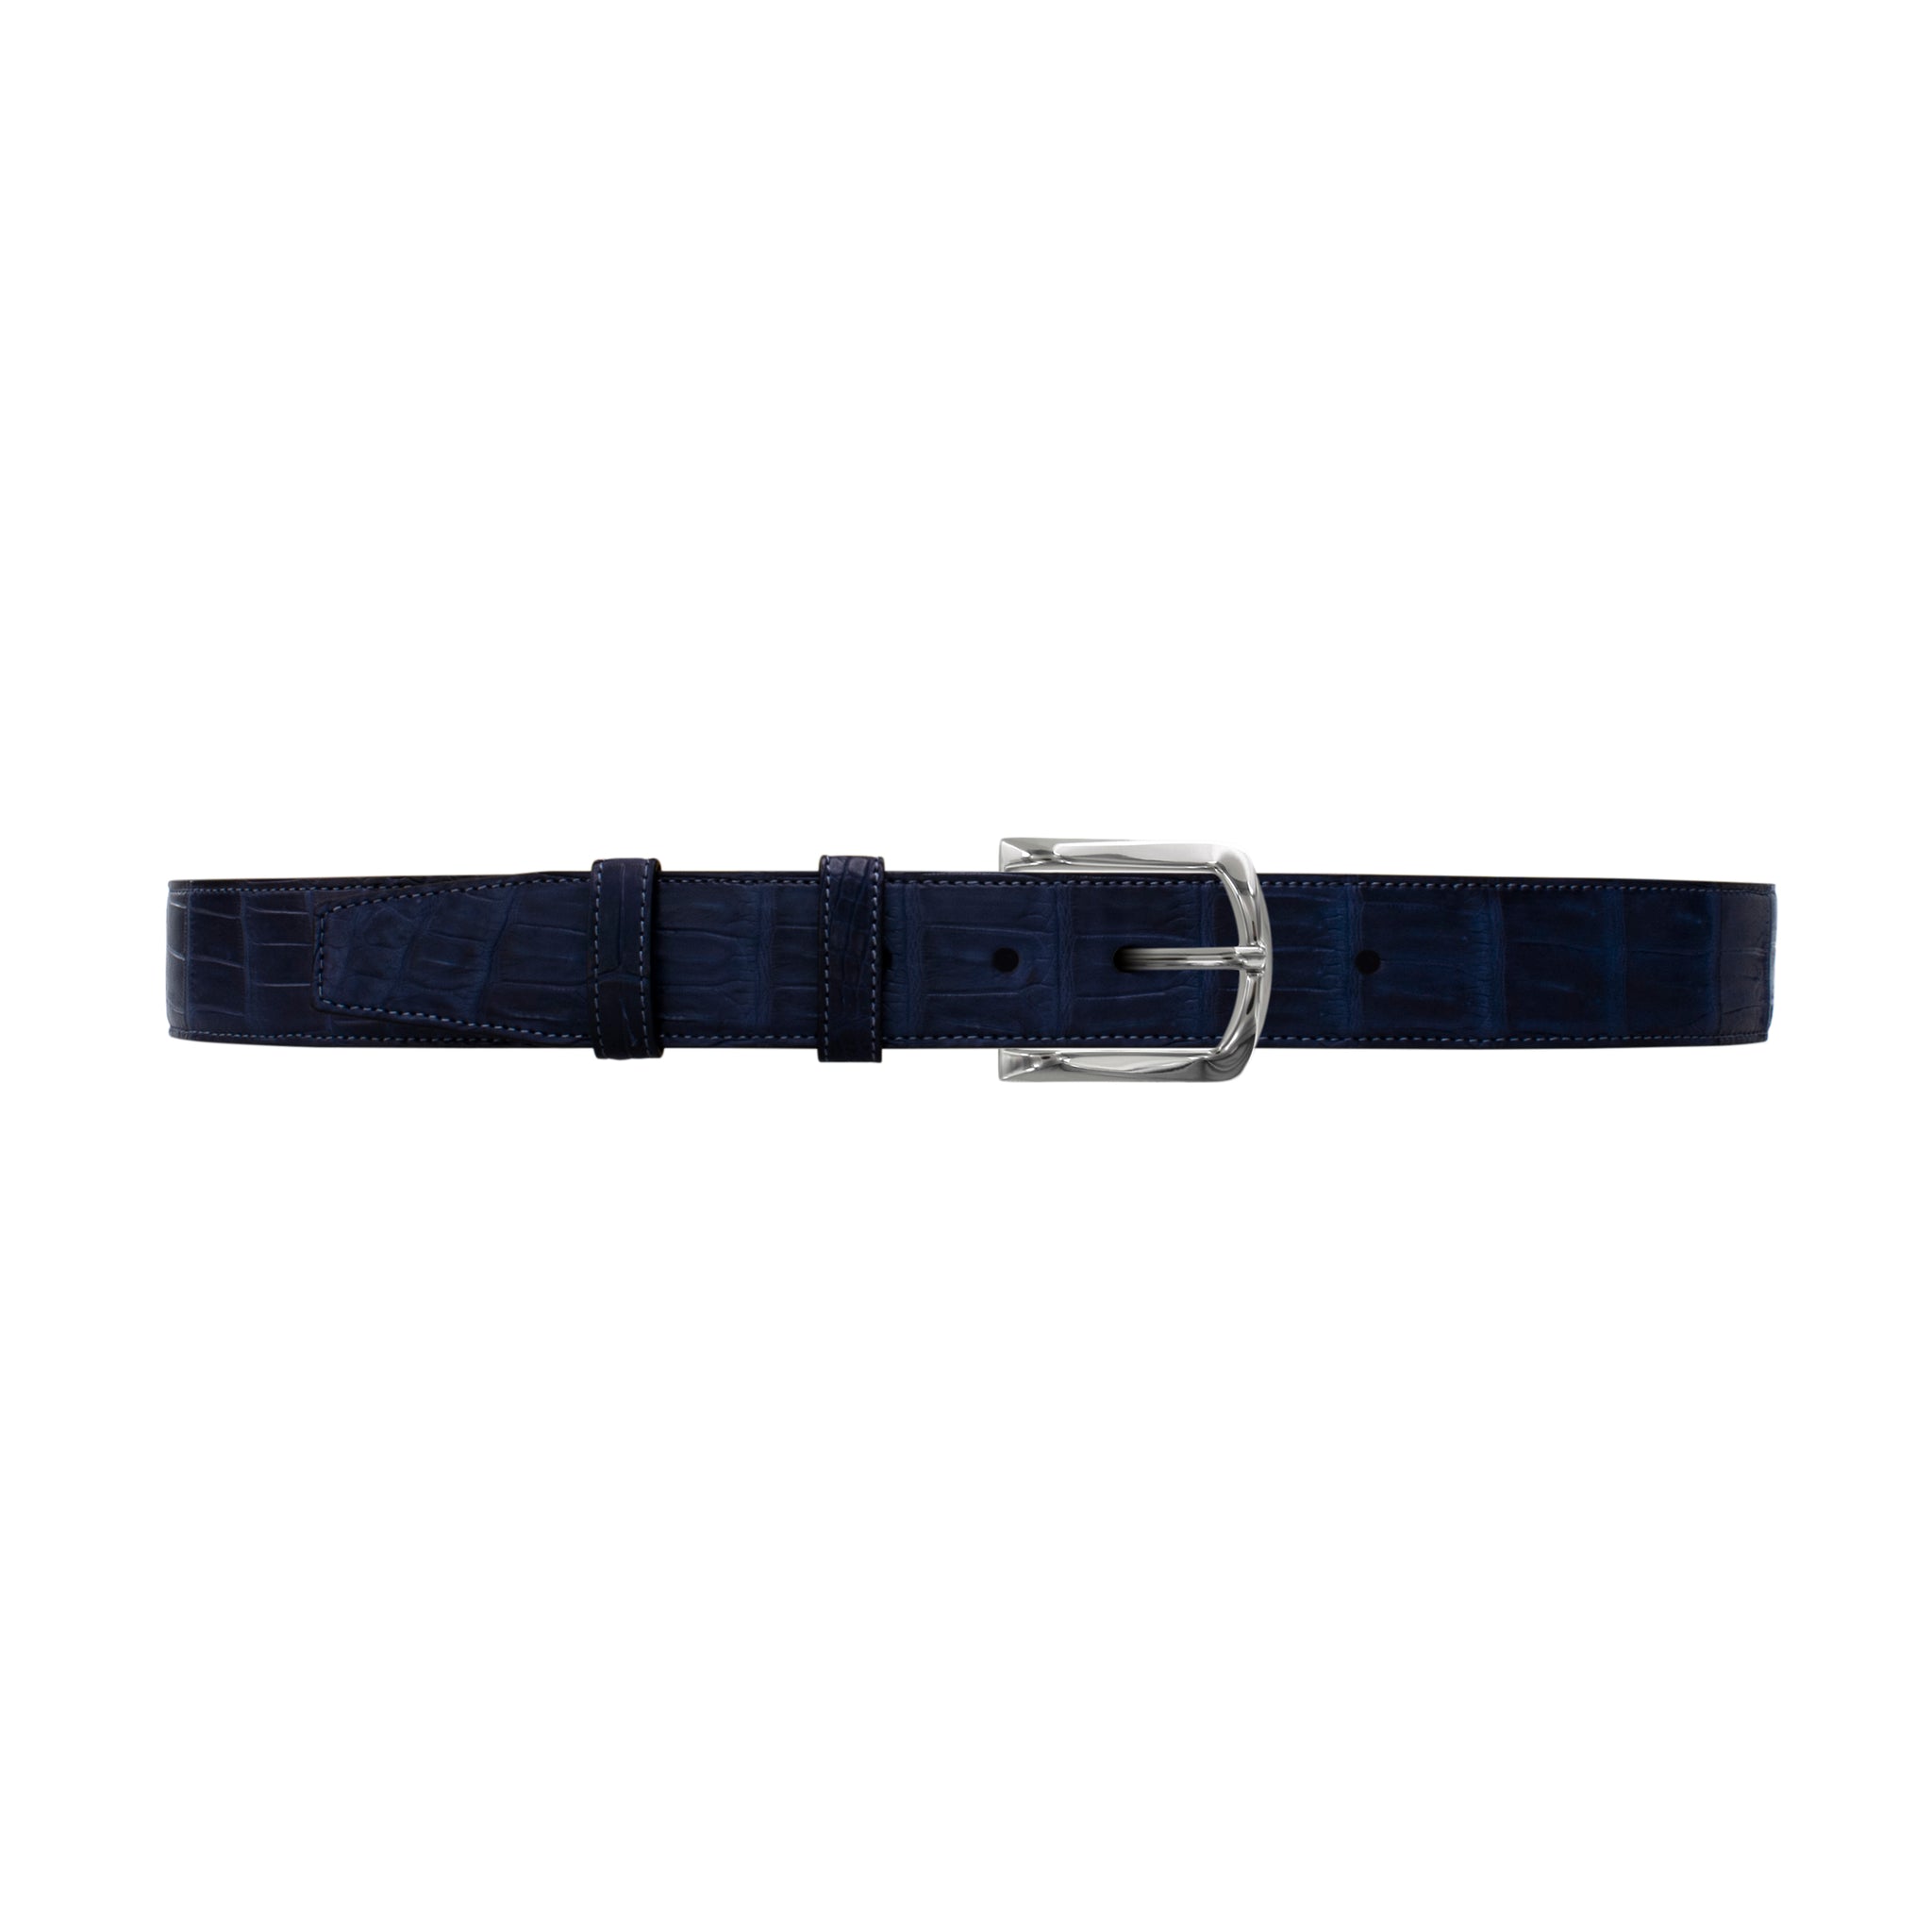 1 1/2" Midnight Classic Belt with Sutton Dress Buckle in Polished Nickel